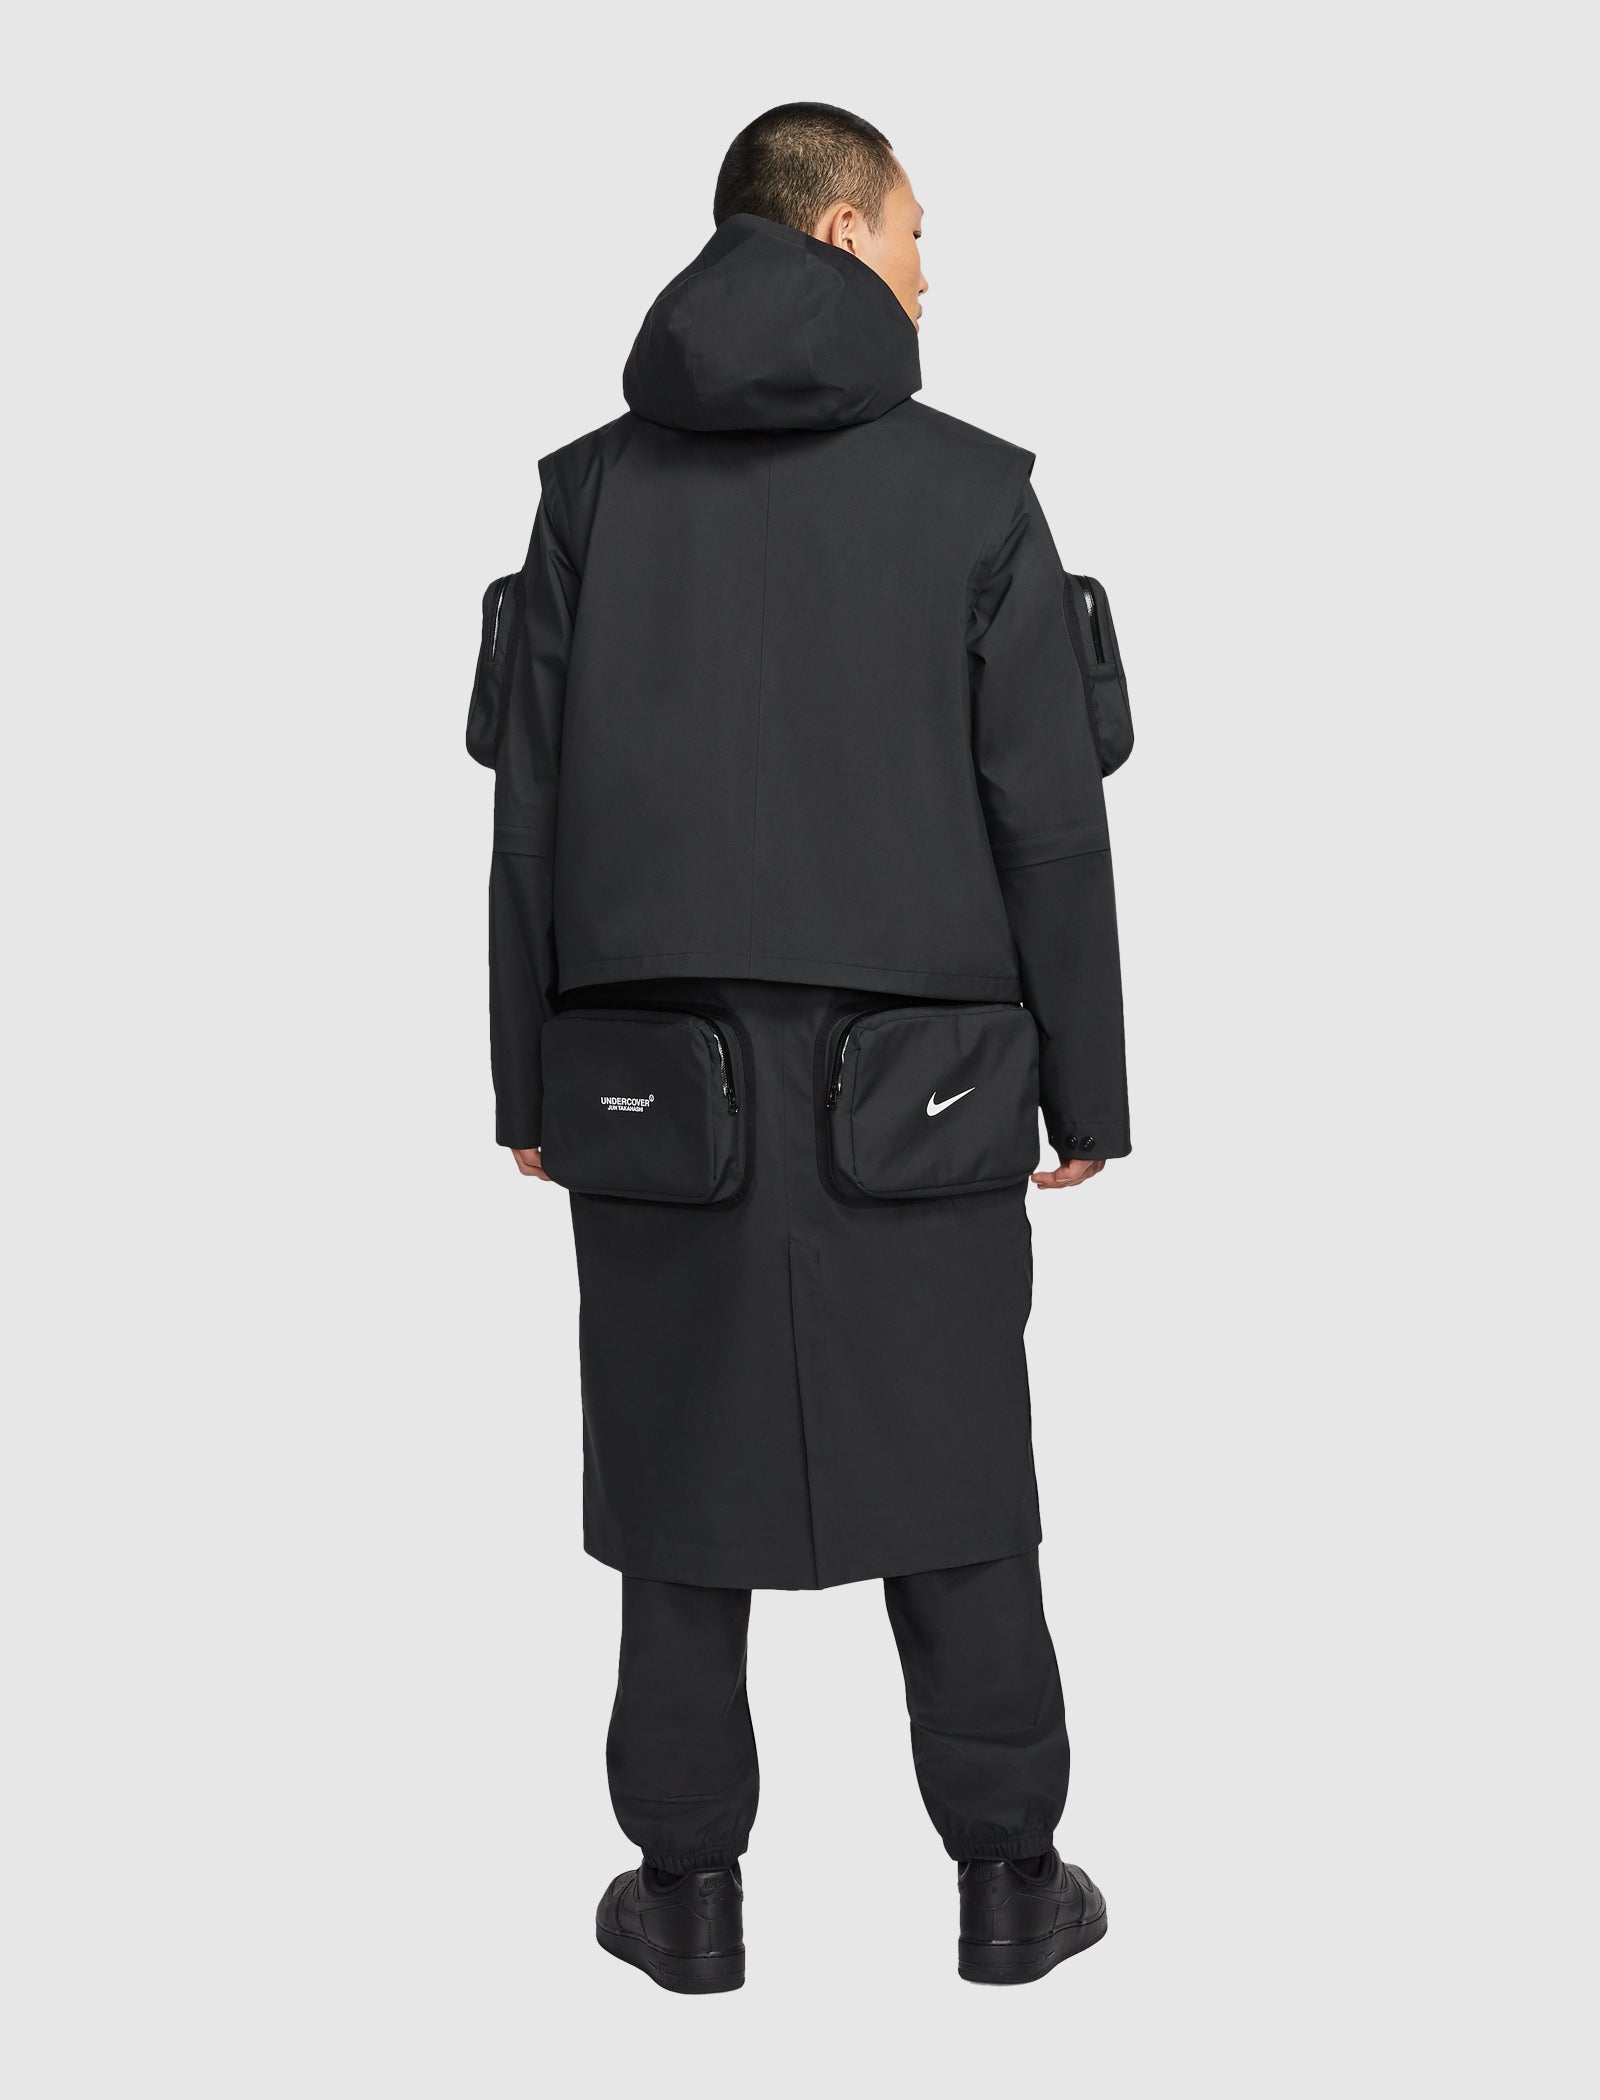 UNDERCOVER PARKA